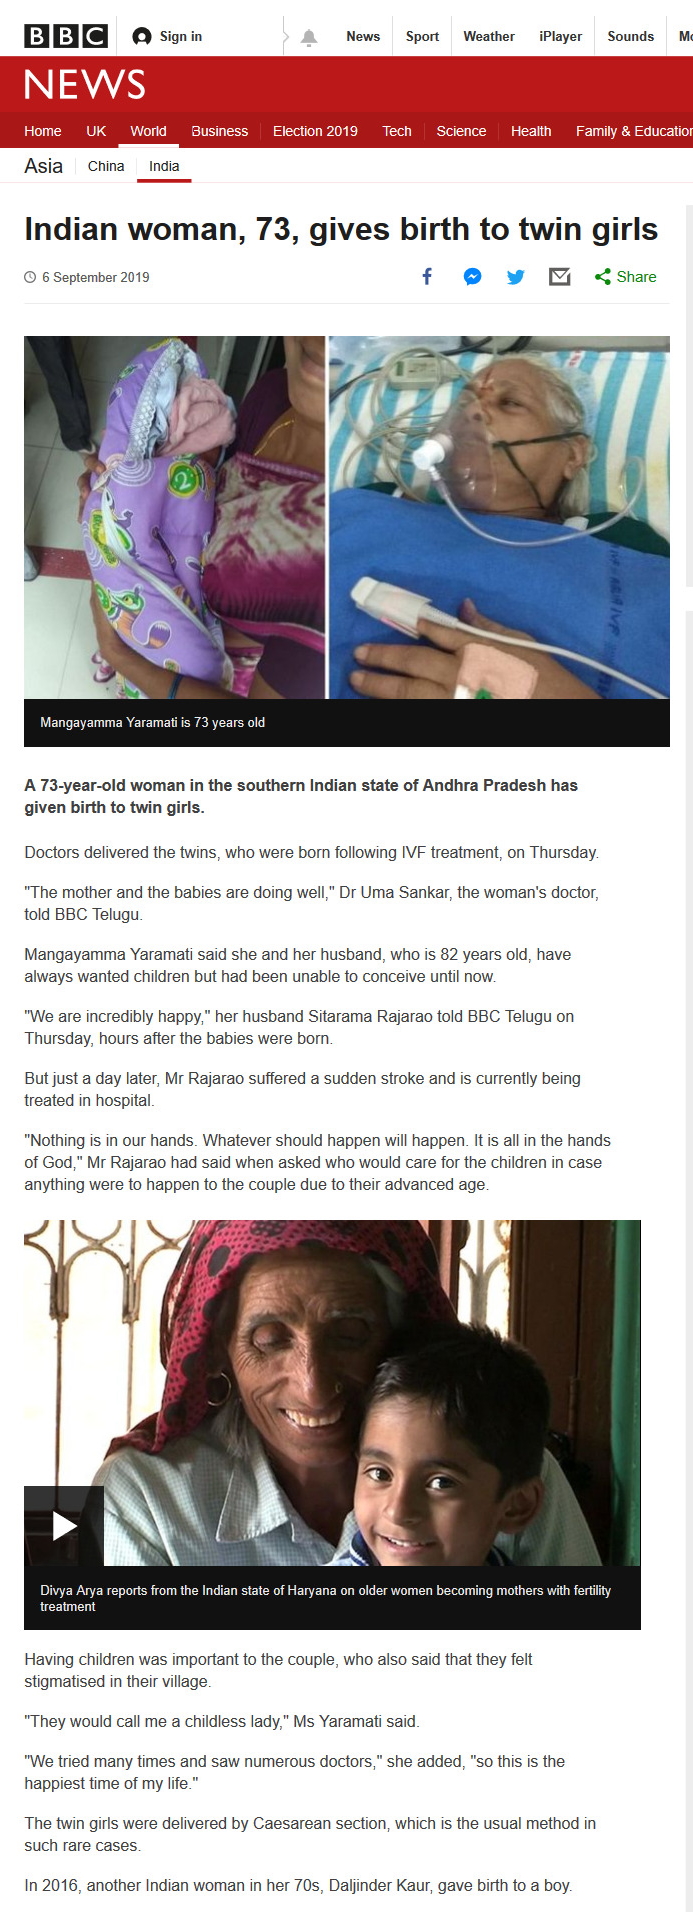 BBC NEWS Indian woman, 73, gives birth to twin girls CROPPED